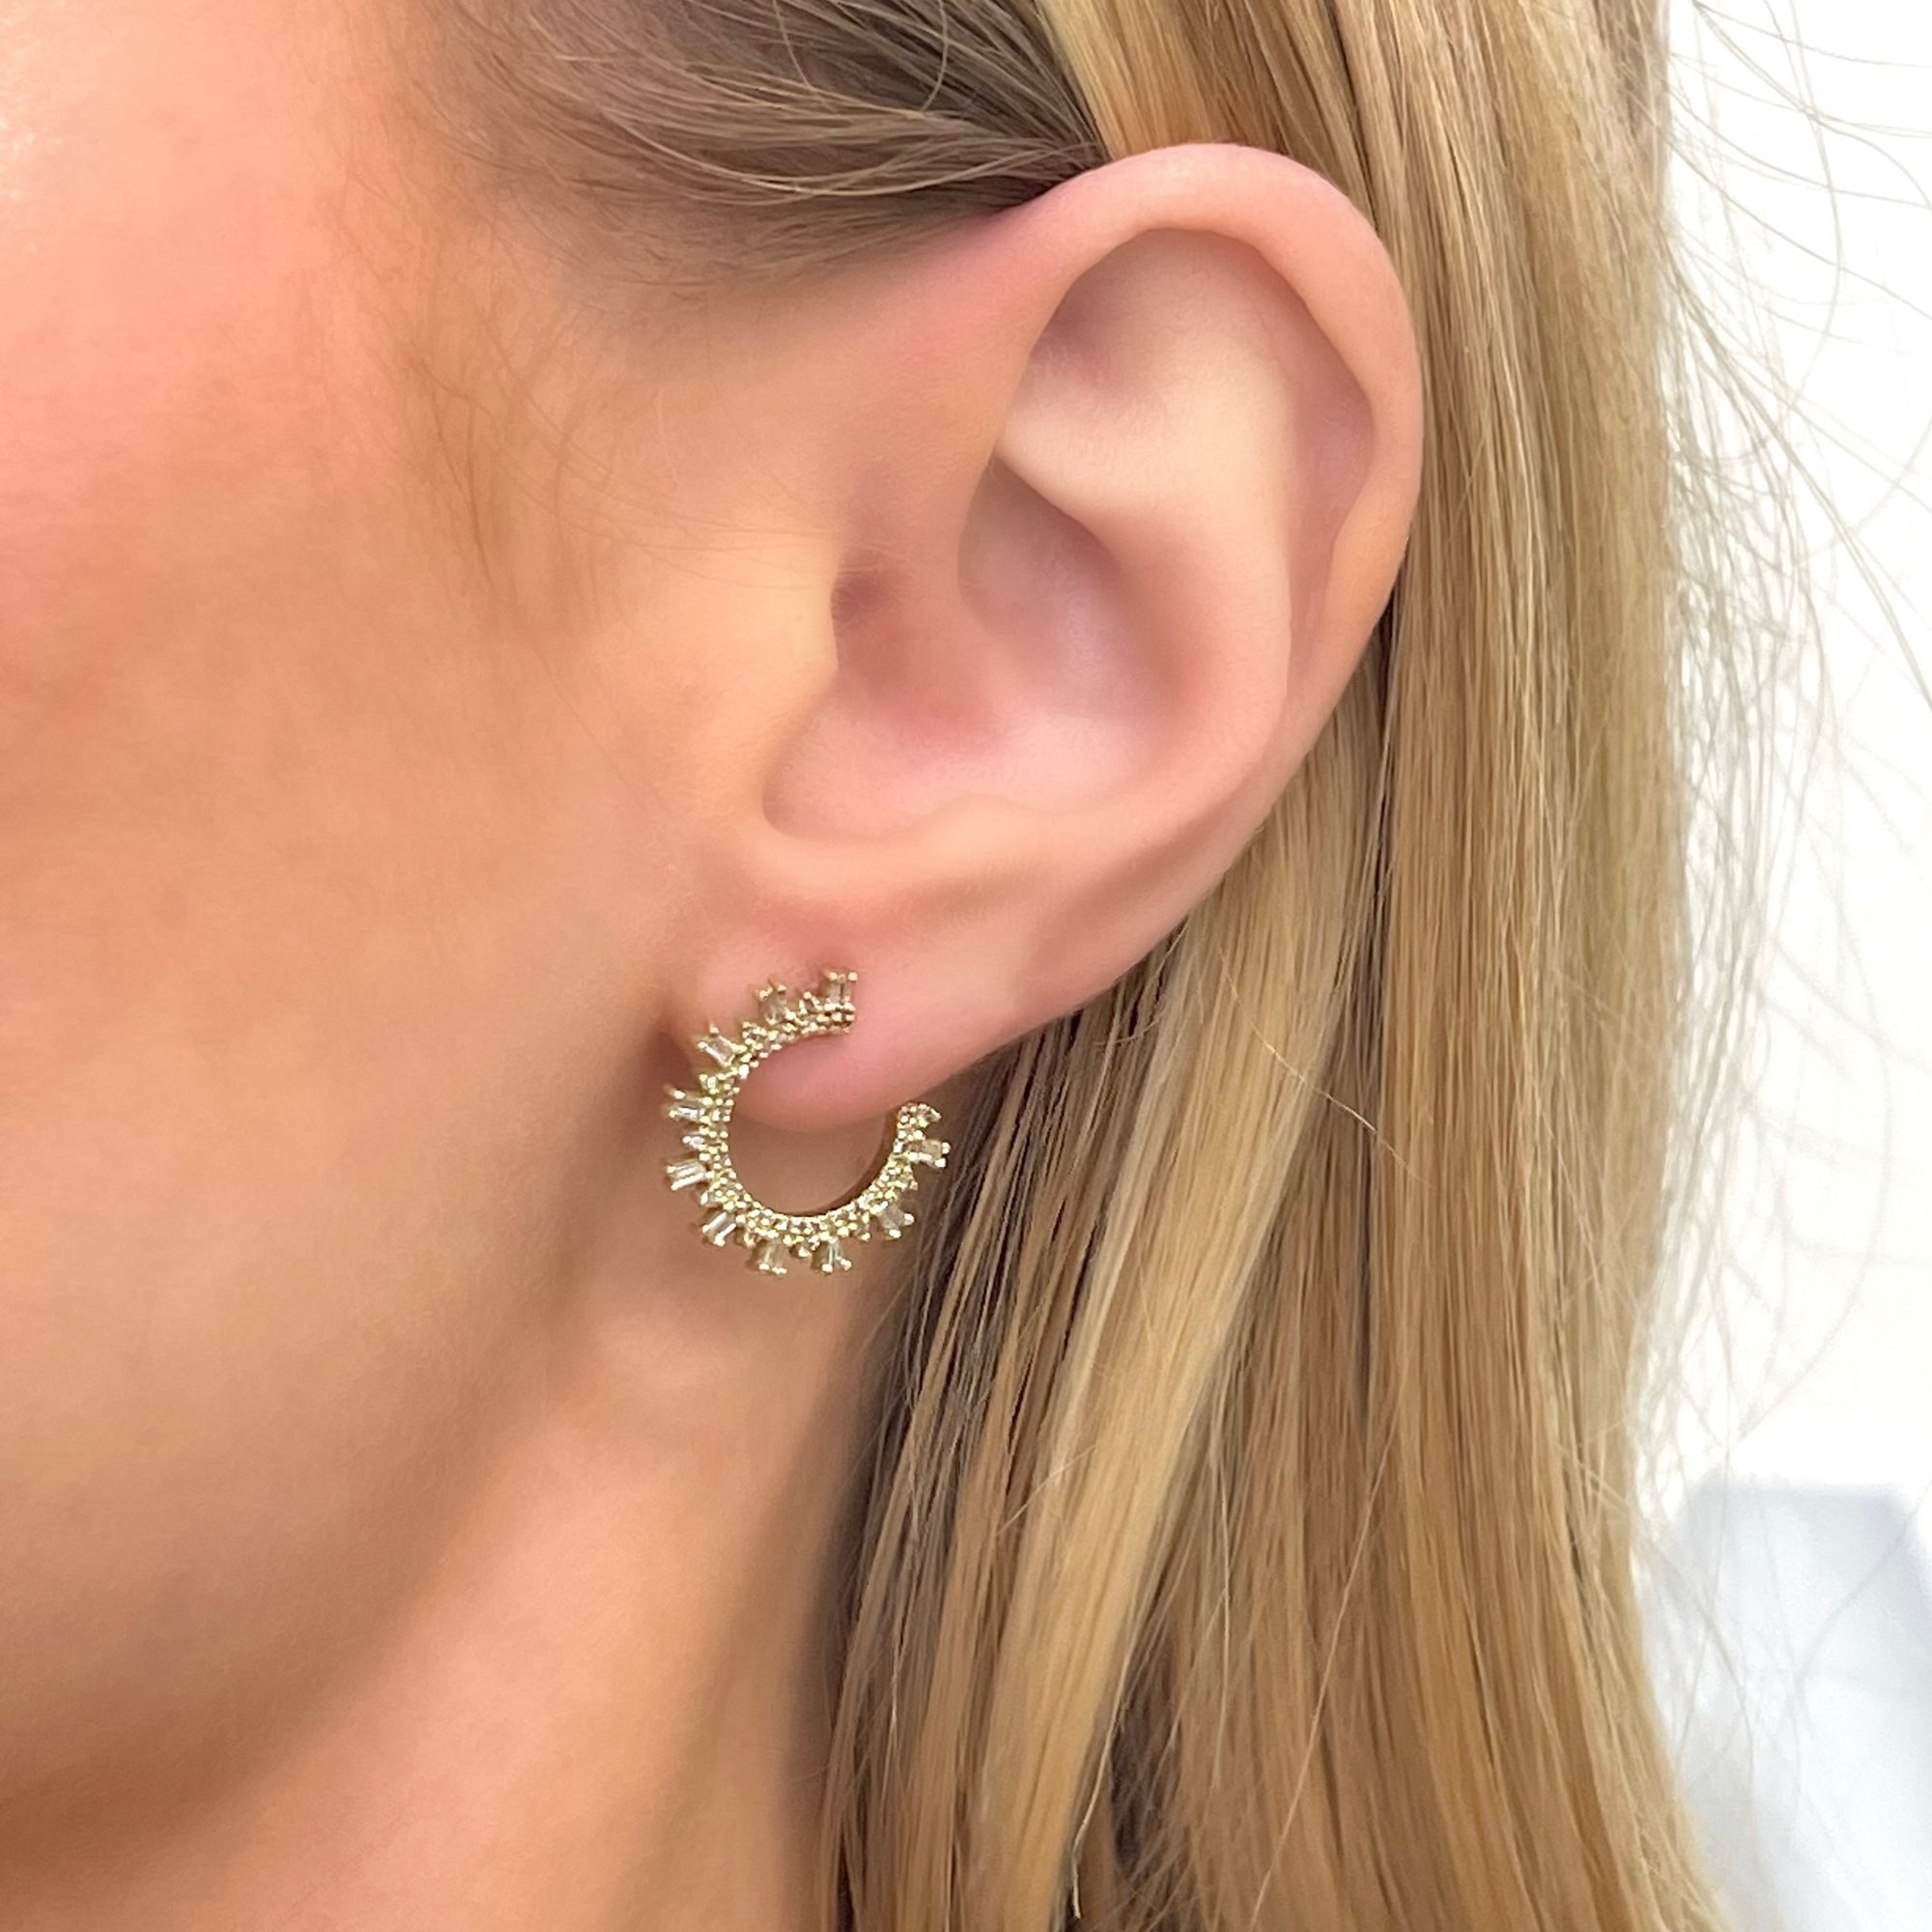 Champagne Diamond Contour Hoop Stud Earrings by Meredith Young